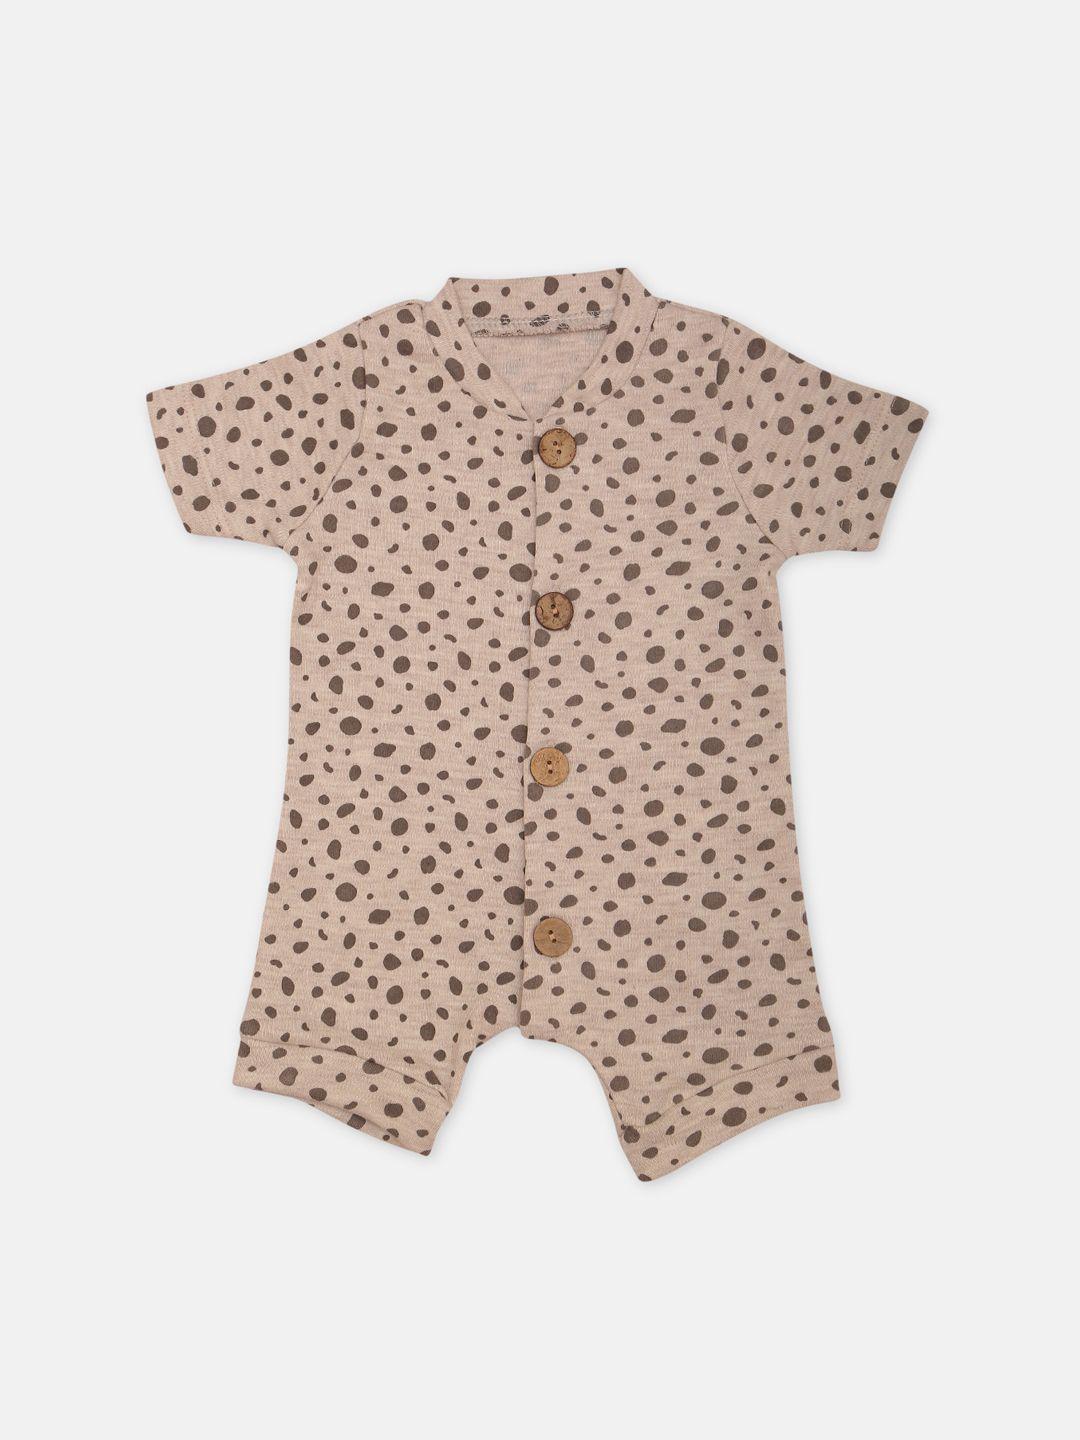 zyra kids infant boys beige & brown printed cotton rompers